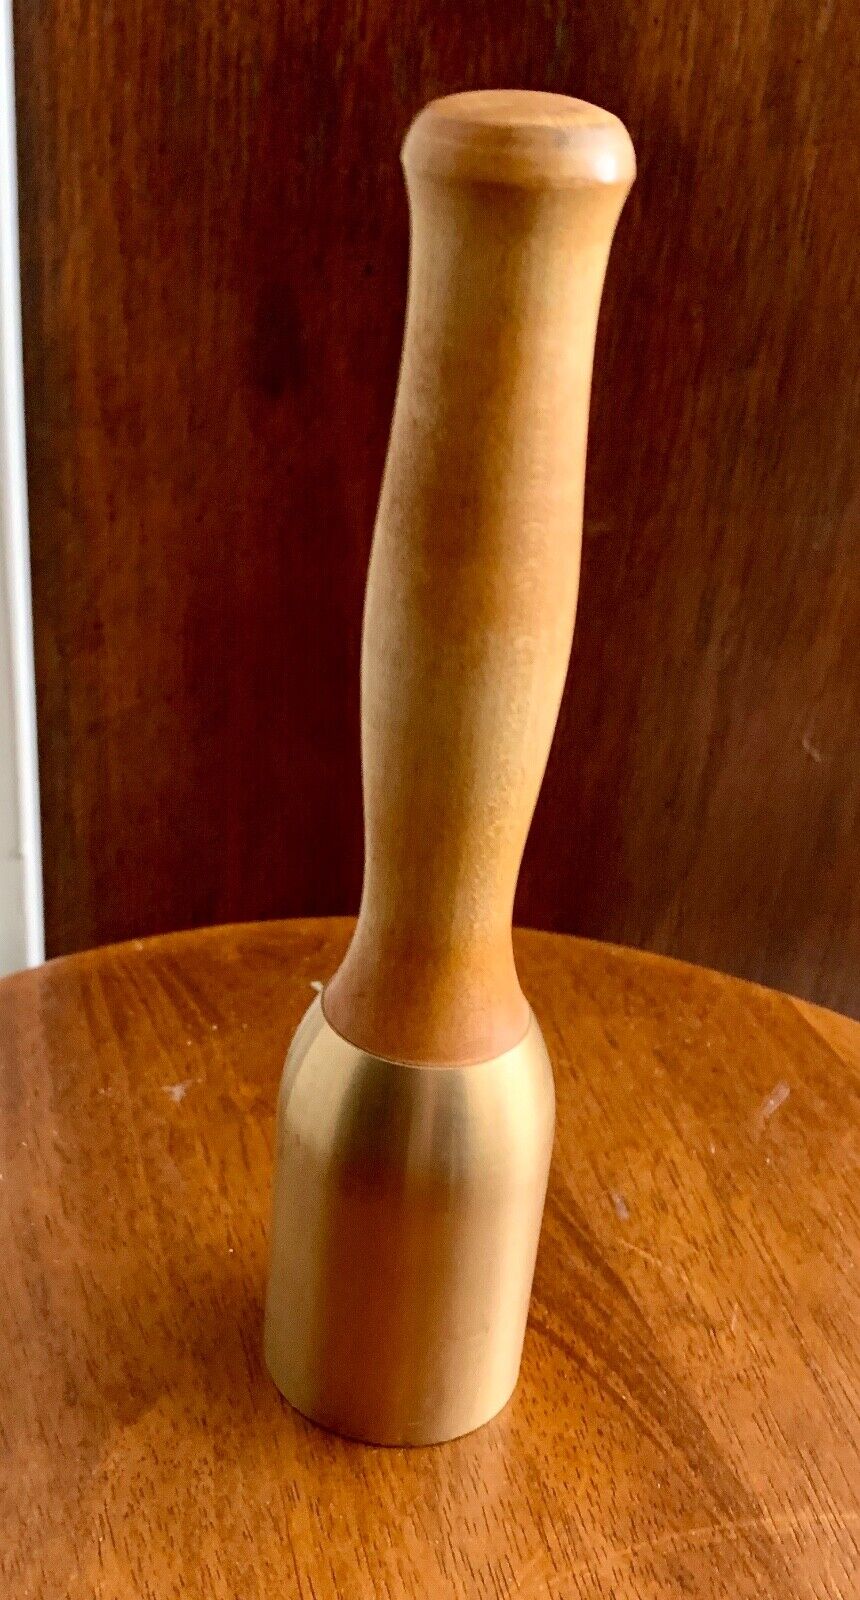 1.5 lb. Heirloom-quality Calvo Brass Wood Carving Mallet Beautiful—VG Condition